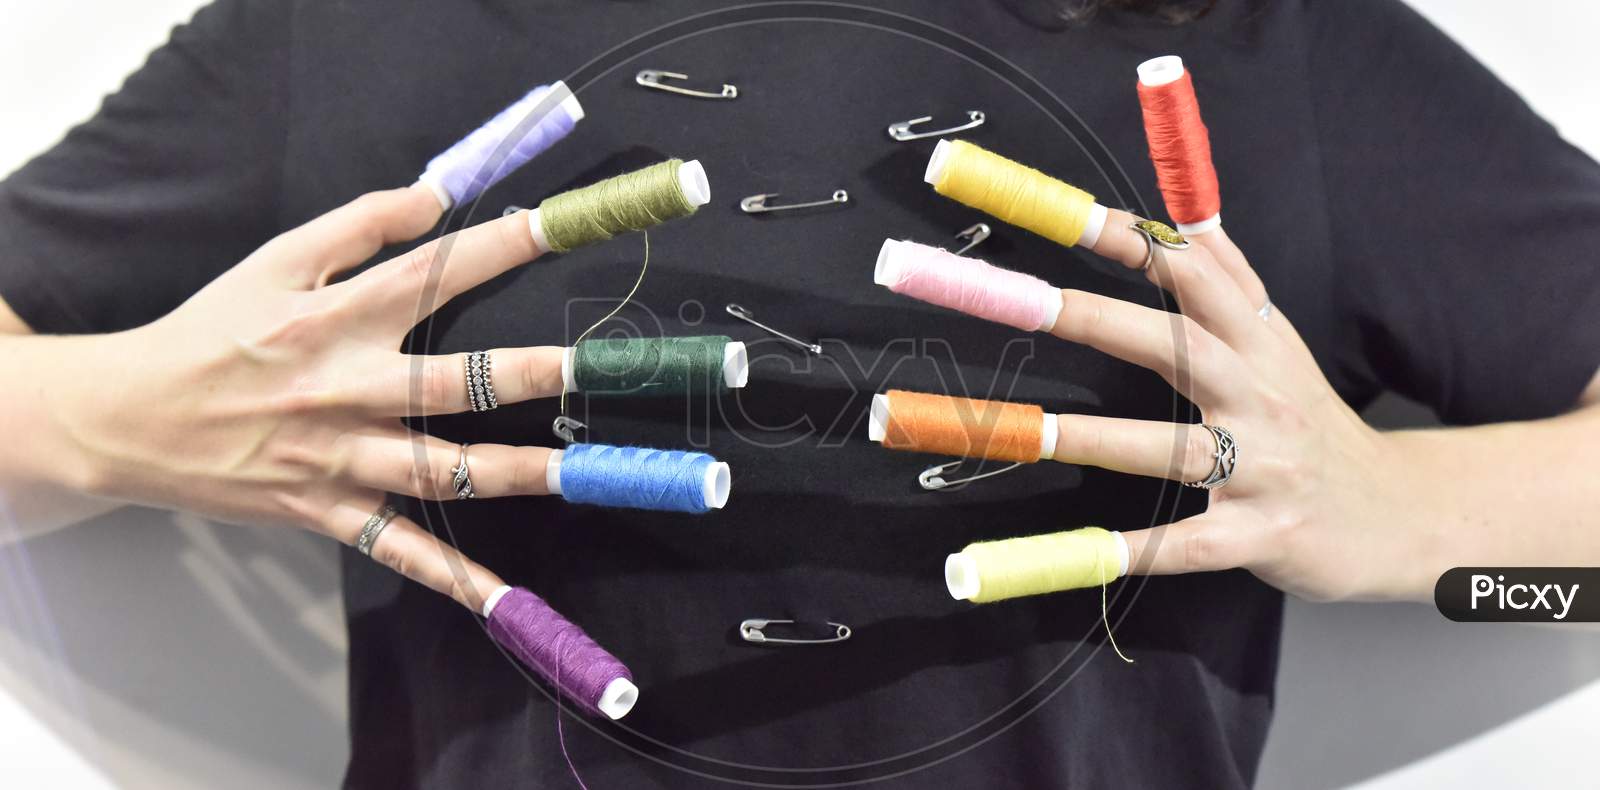 Sewing Threads As A Prolongation Of Fingers